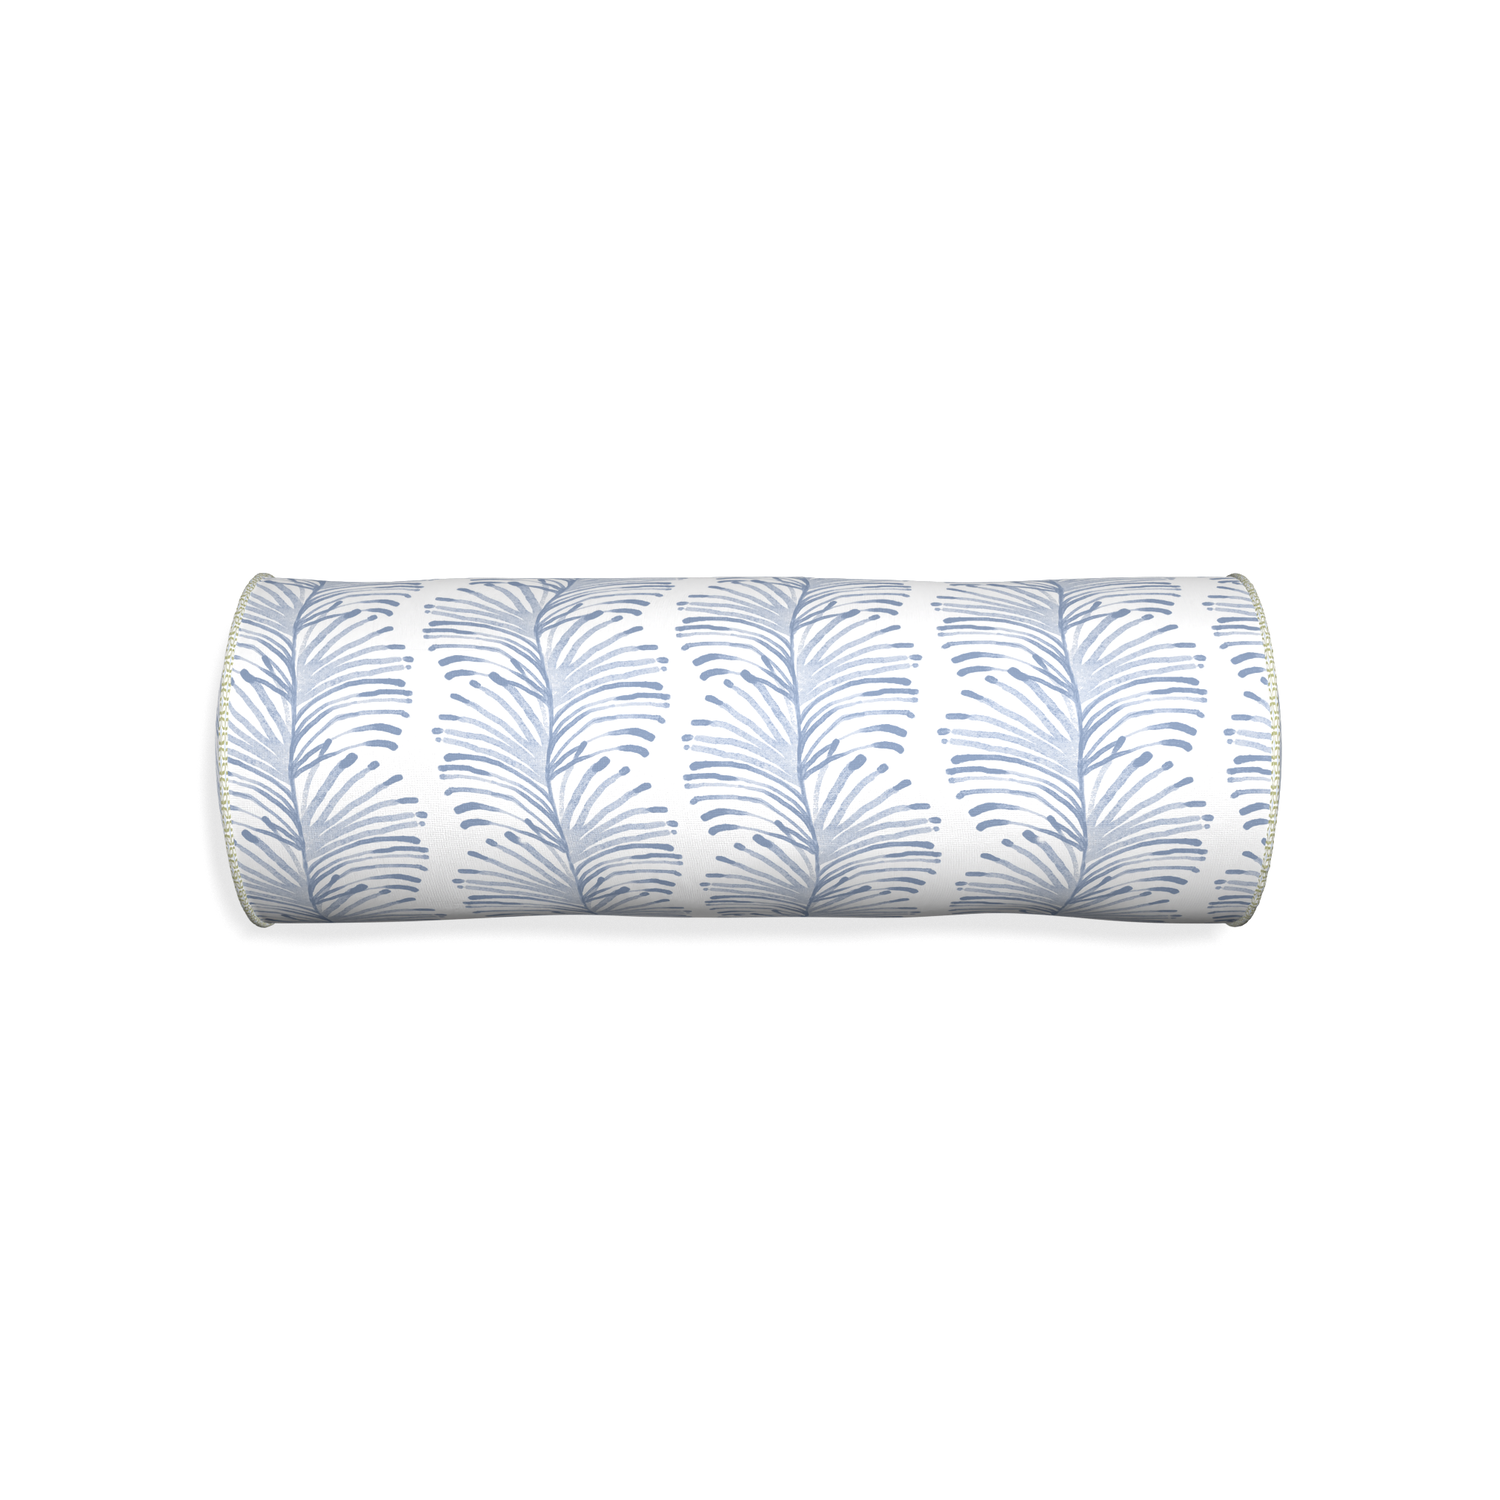 Bolster emma sky custom sky blue botanical stripepillow with l piping on white background